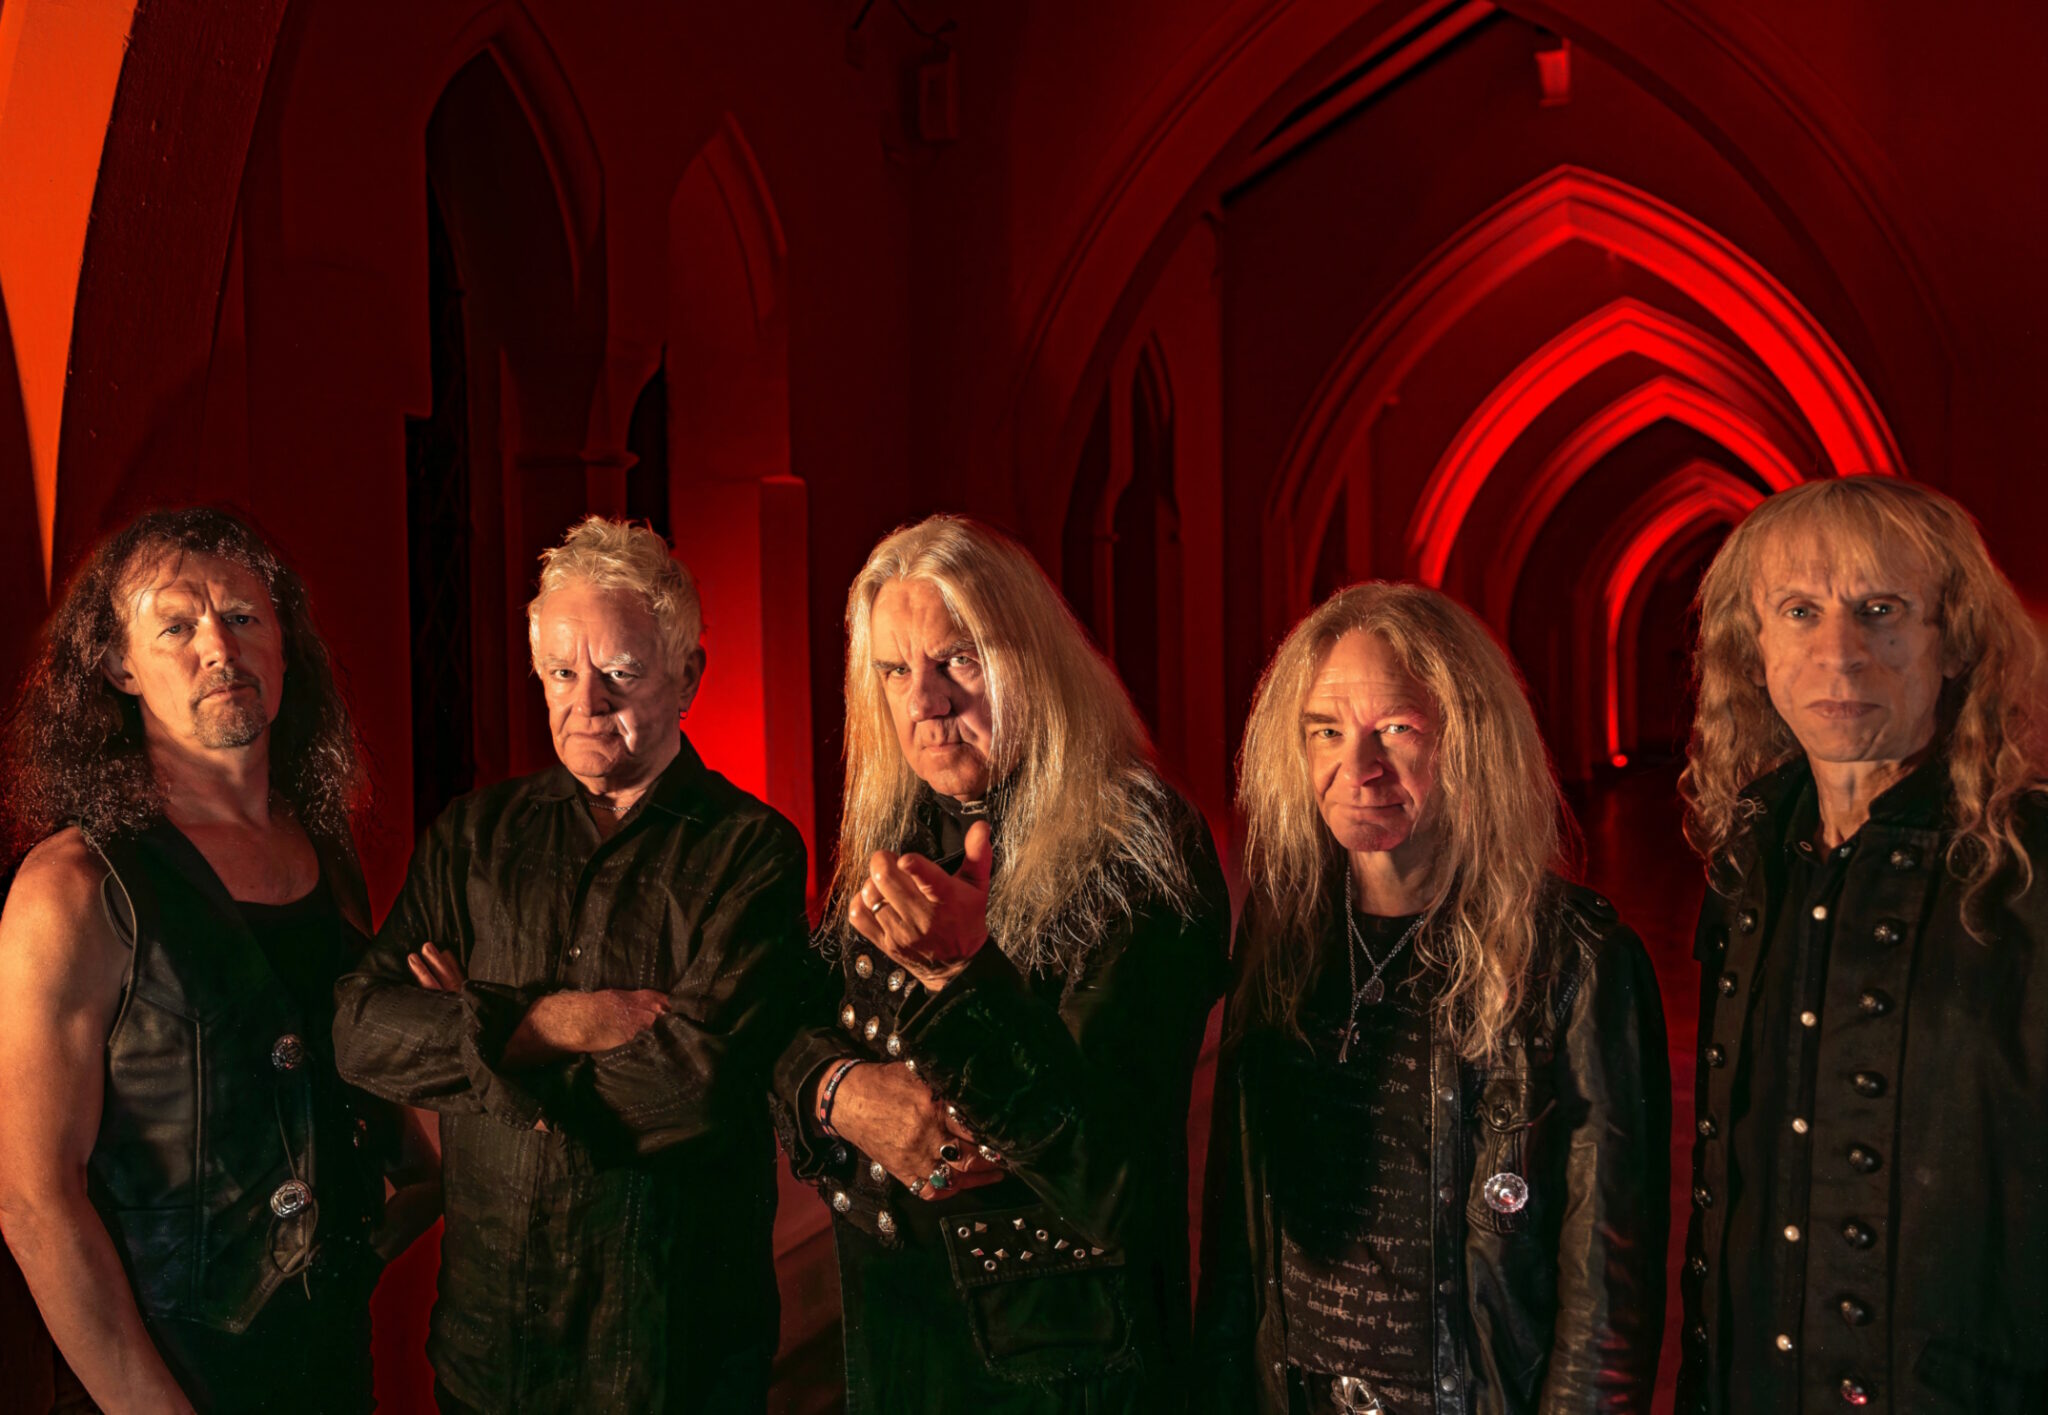 Saxon: Four Decades Plus Of Heavy Metal With No Signs Of Slowing Down